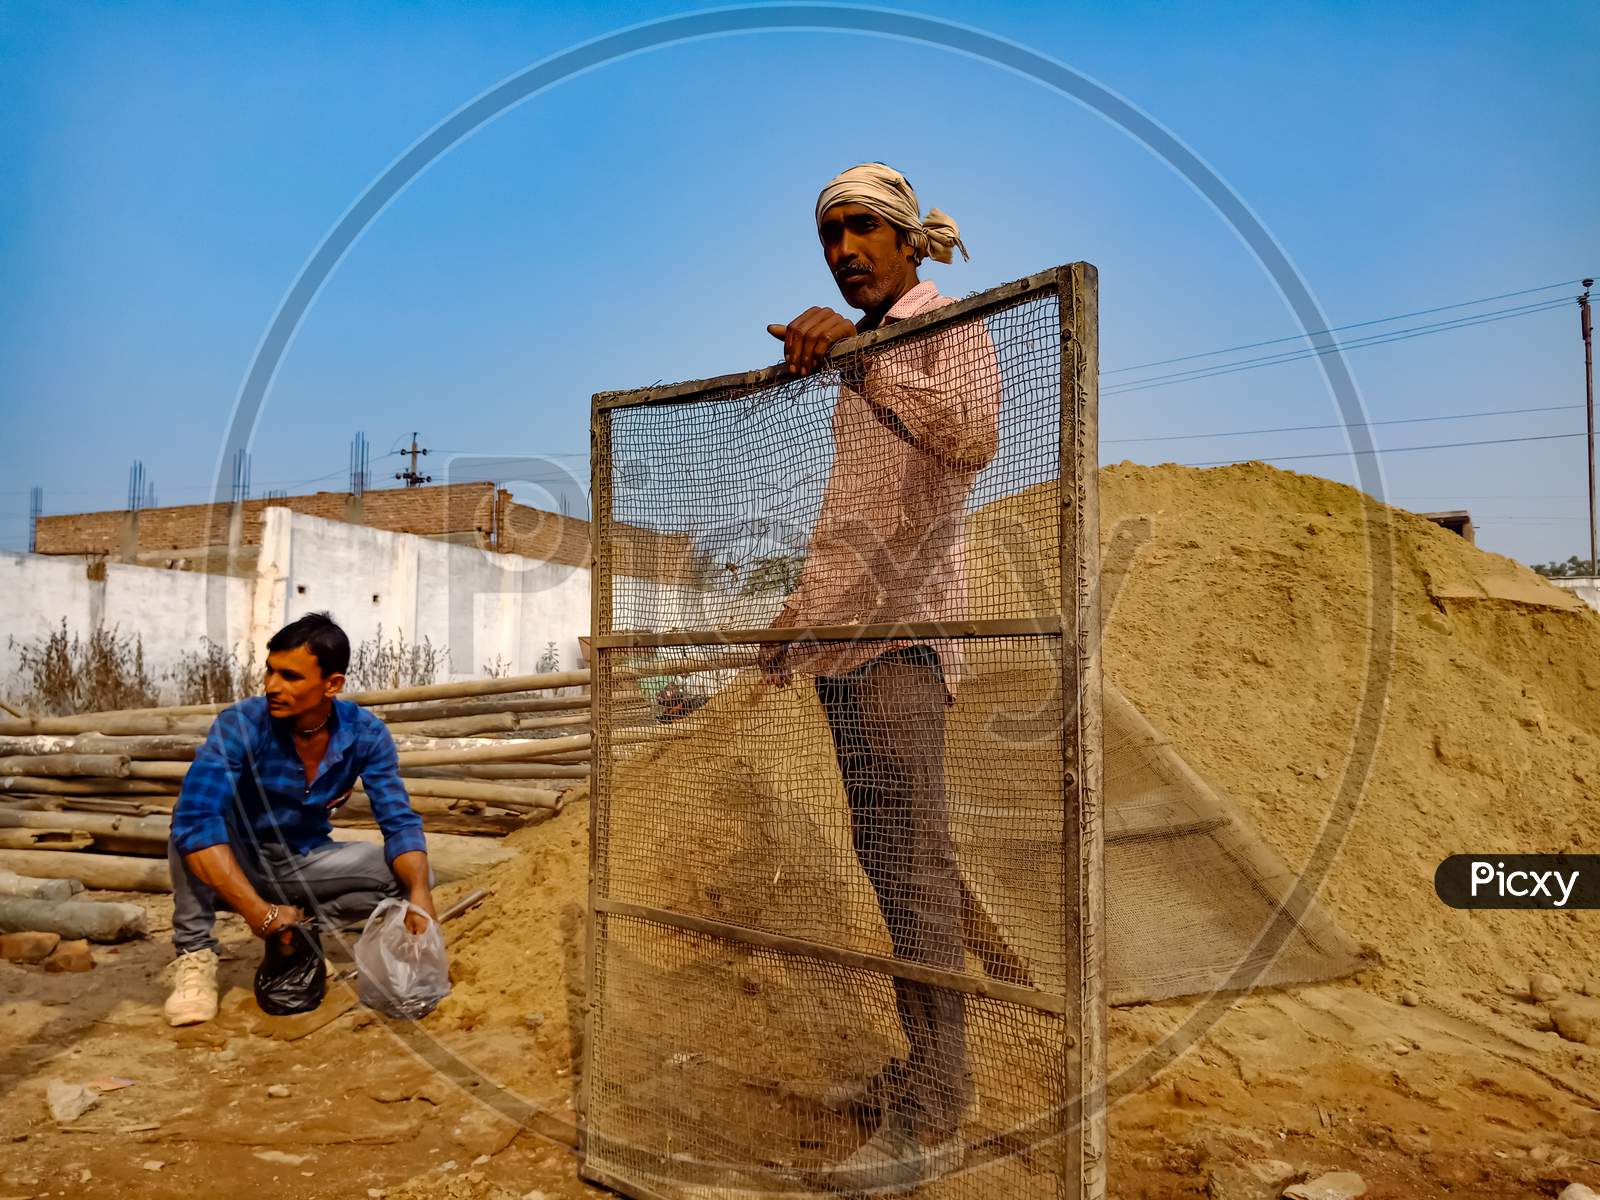 Indian Workers On Construction Site.